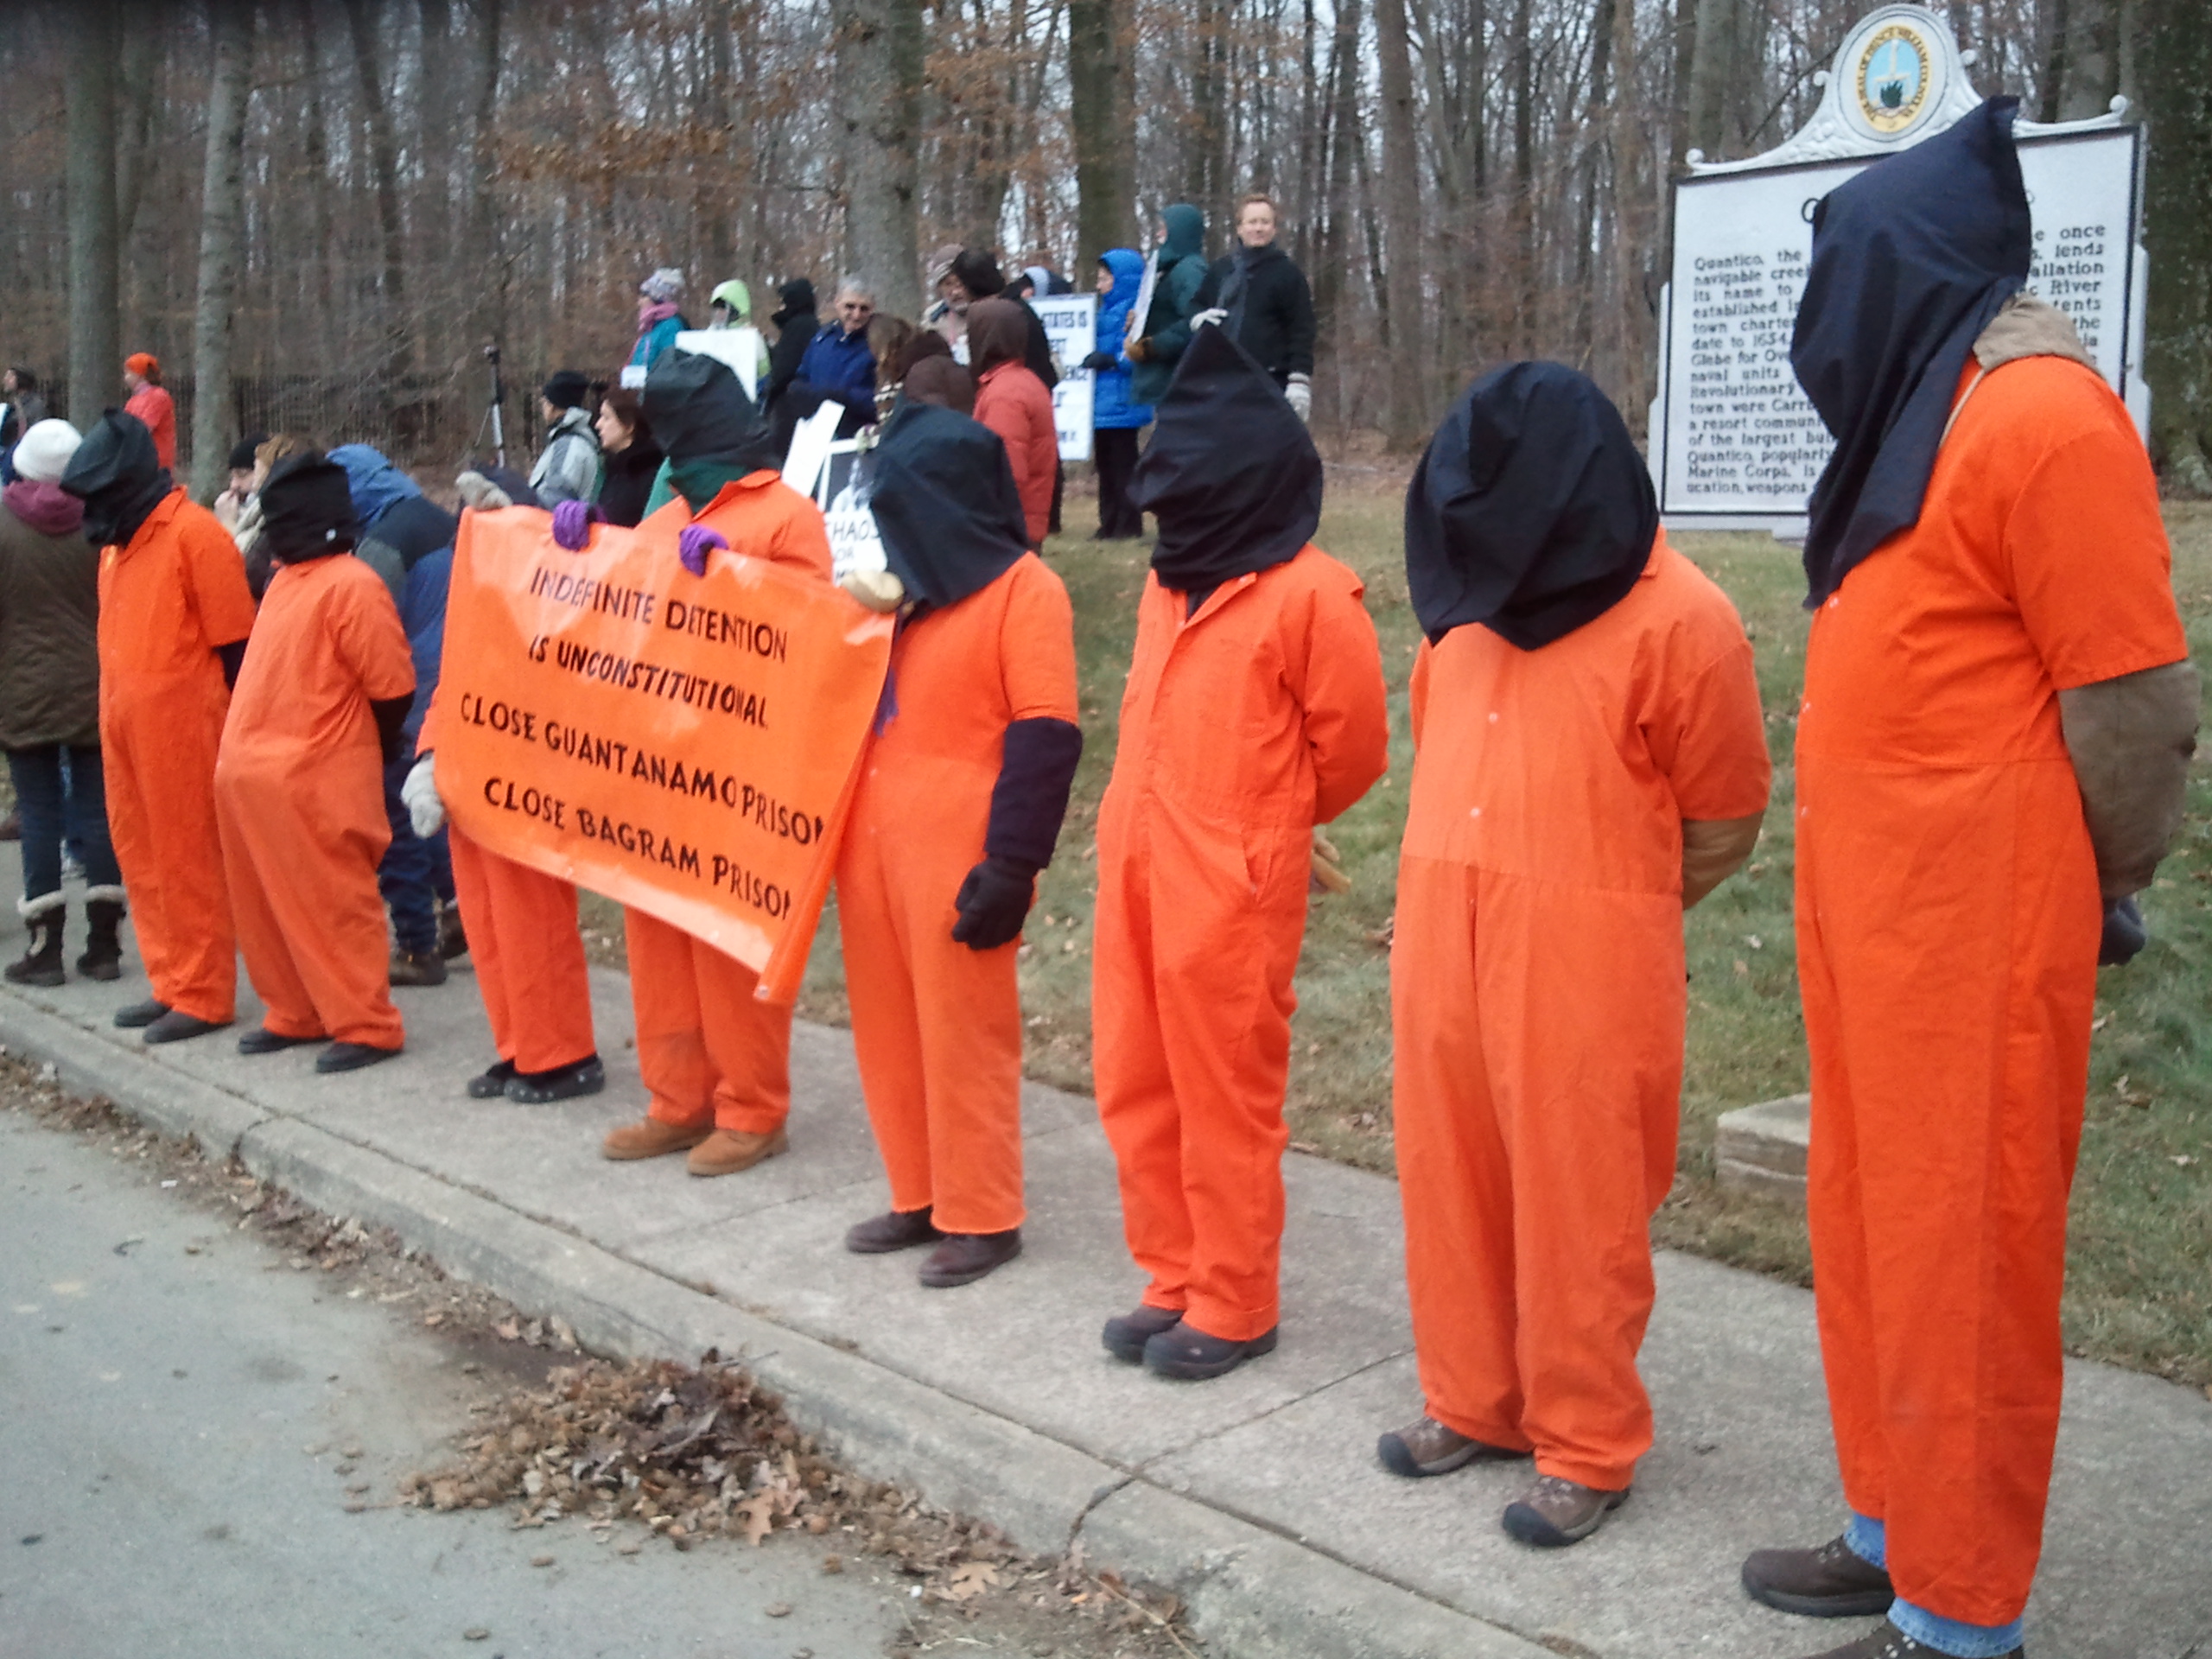 Protesting Outside Quantico on MLK Day